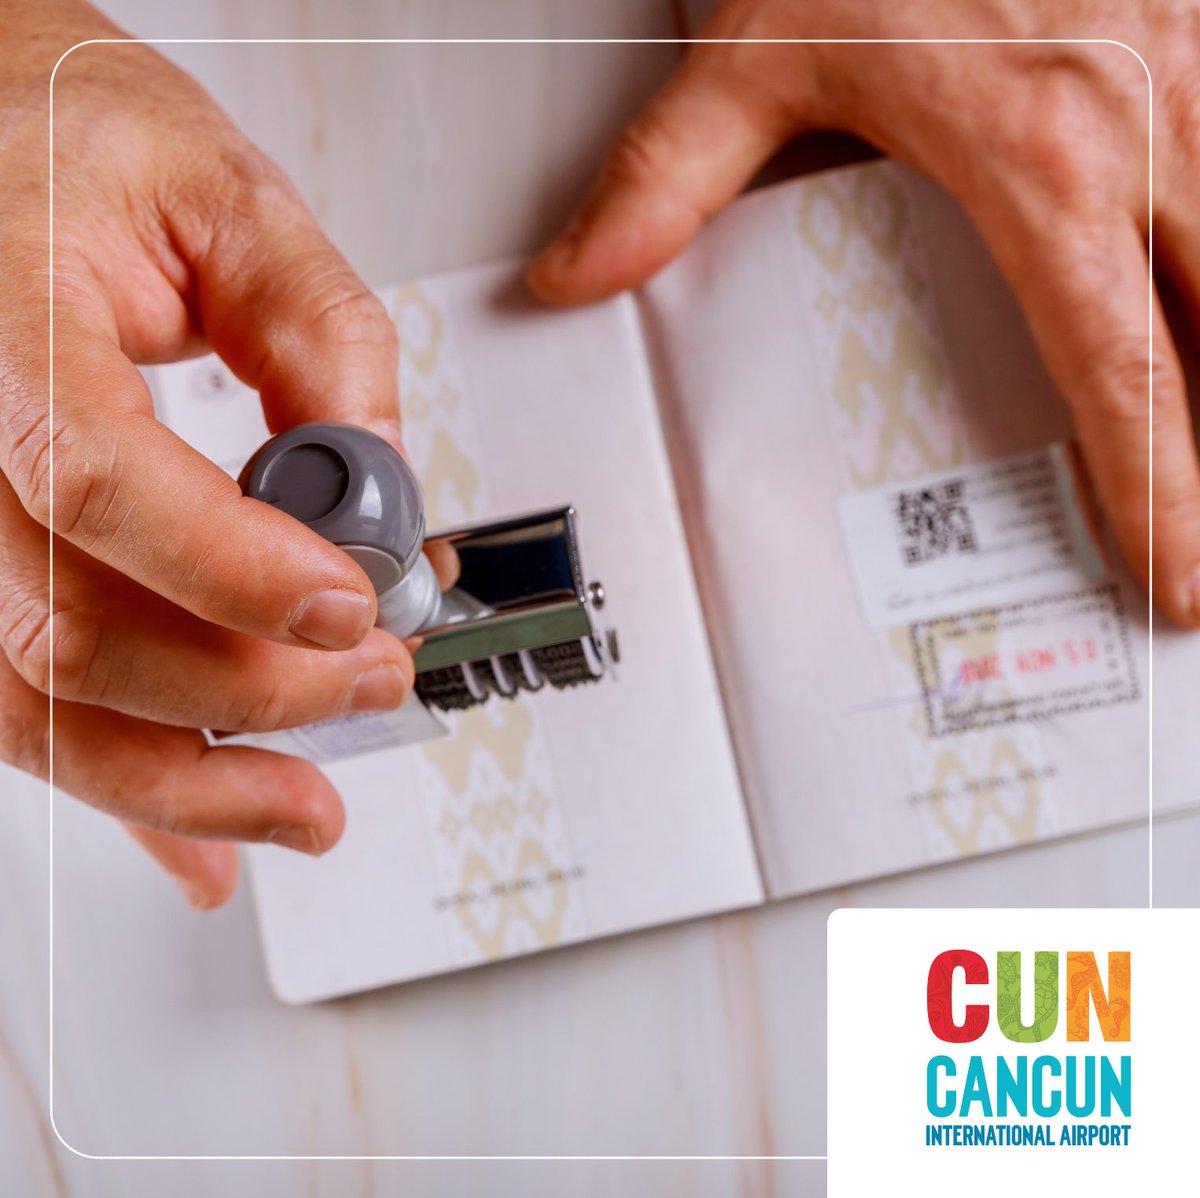 If you come from abroad, you need a valid passport to visit Cancun! Visit our website for more information! cancunairport.com #aeropuertodecancun #playadelcarmen #cancun #Tulum